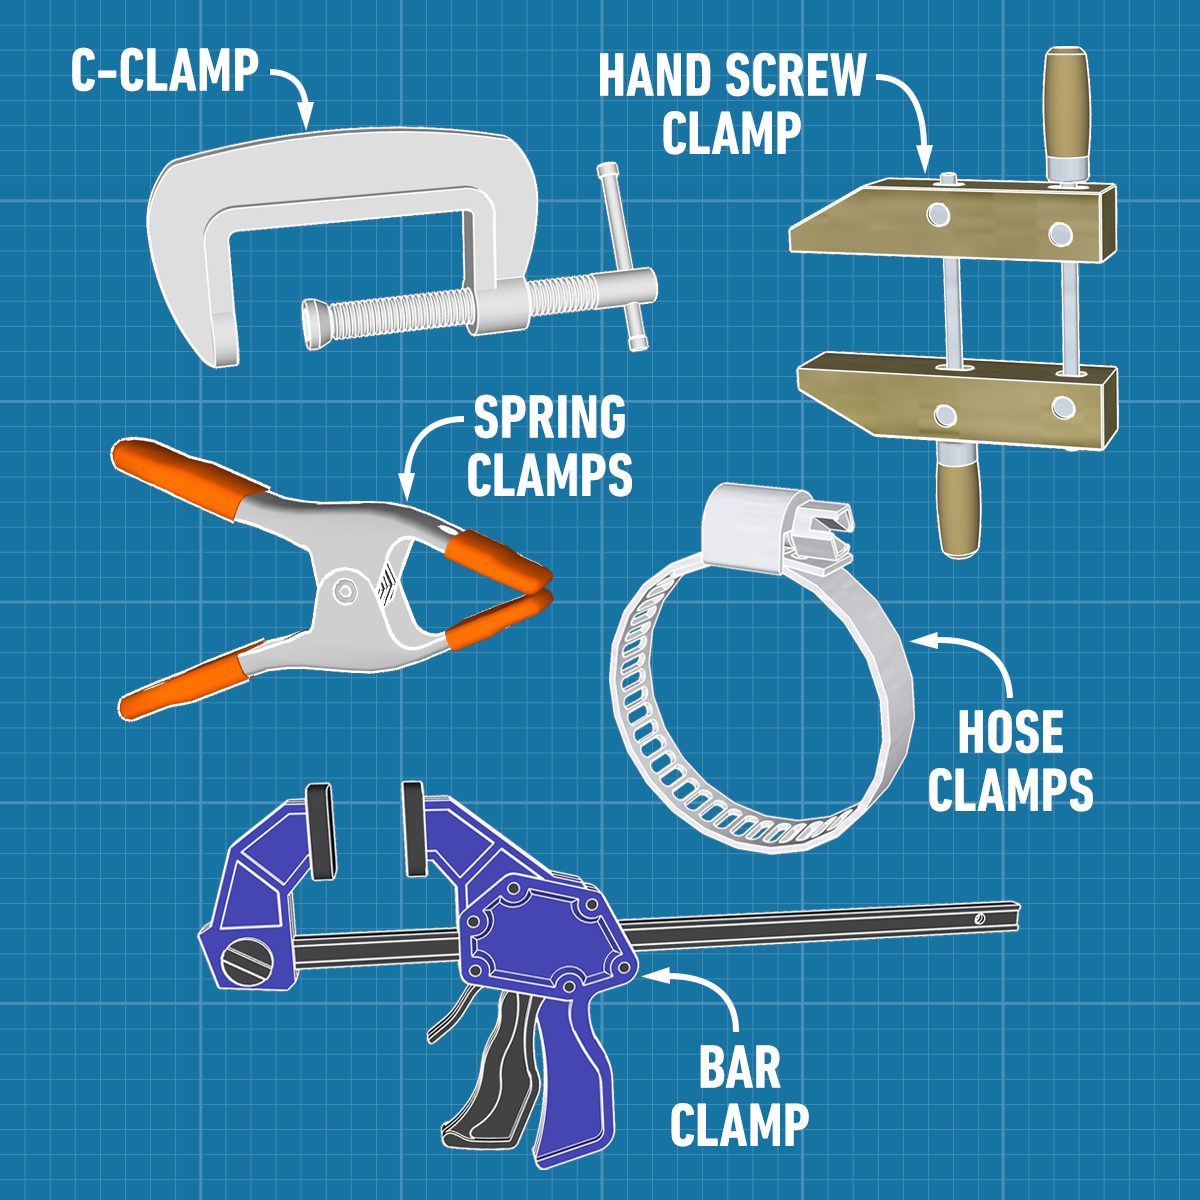 Fhm 8 Types Of Clamps And What They're Used For